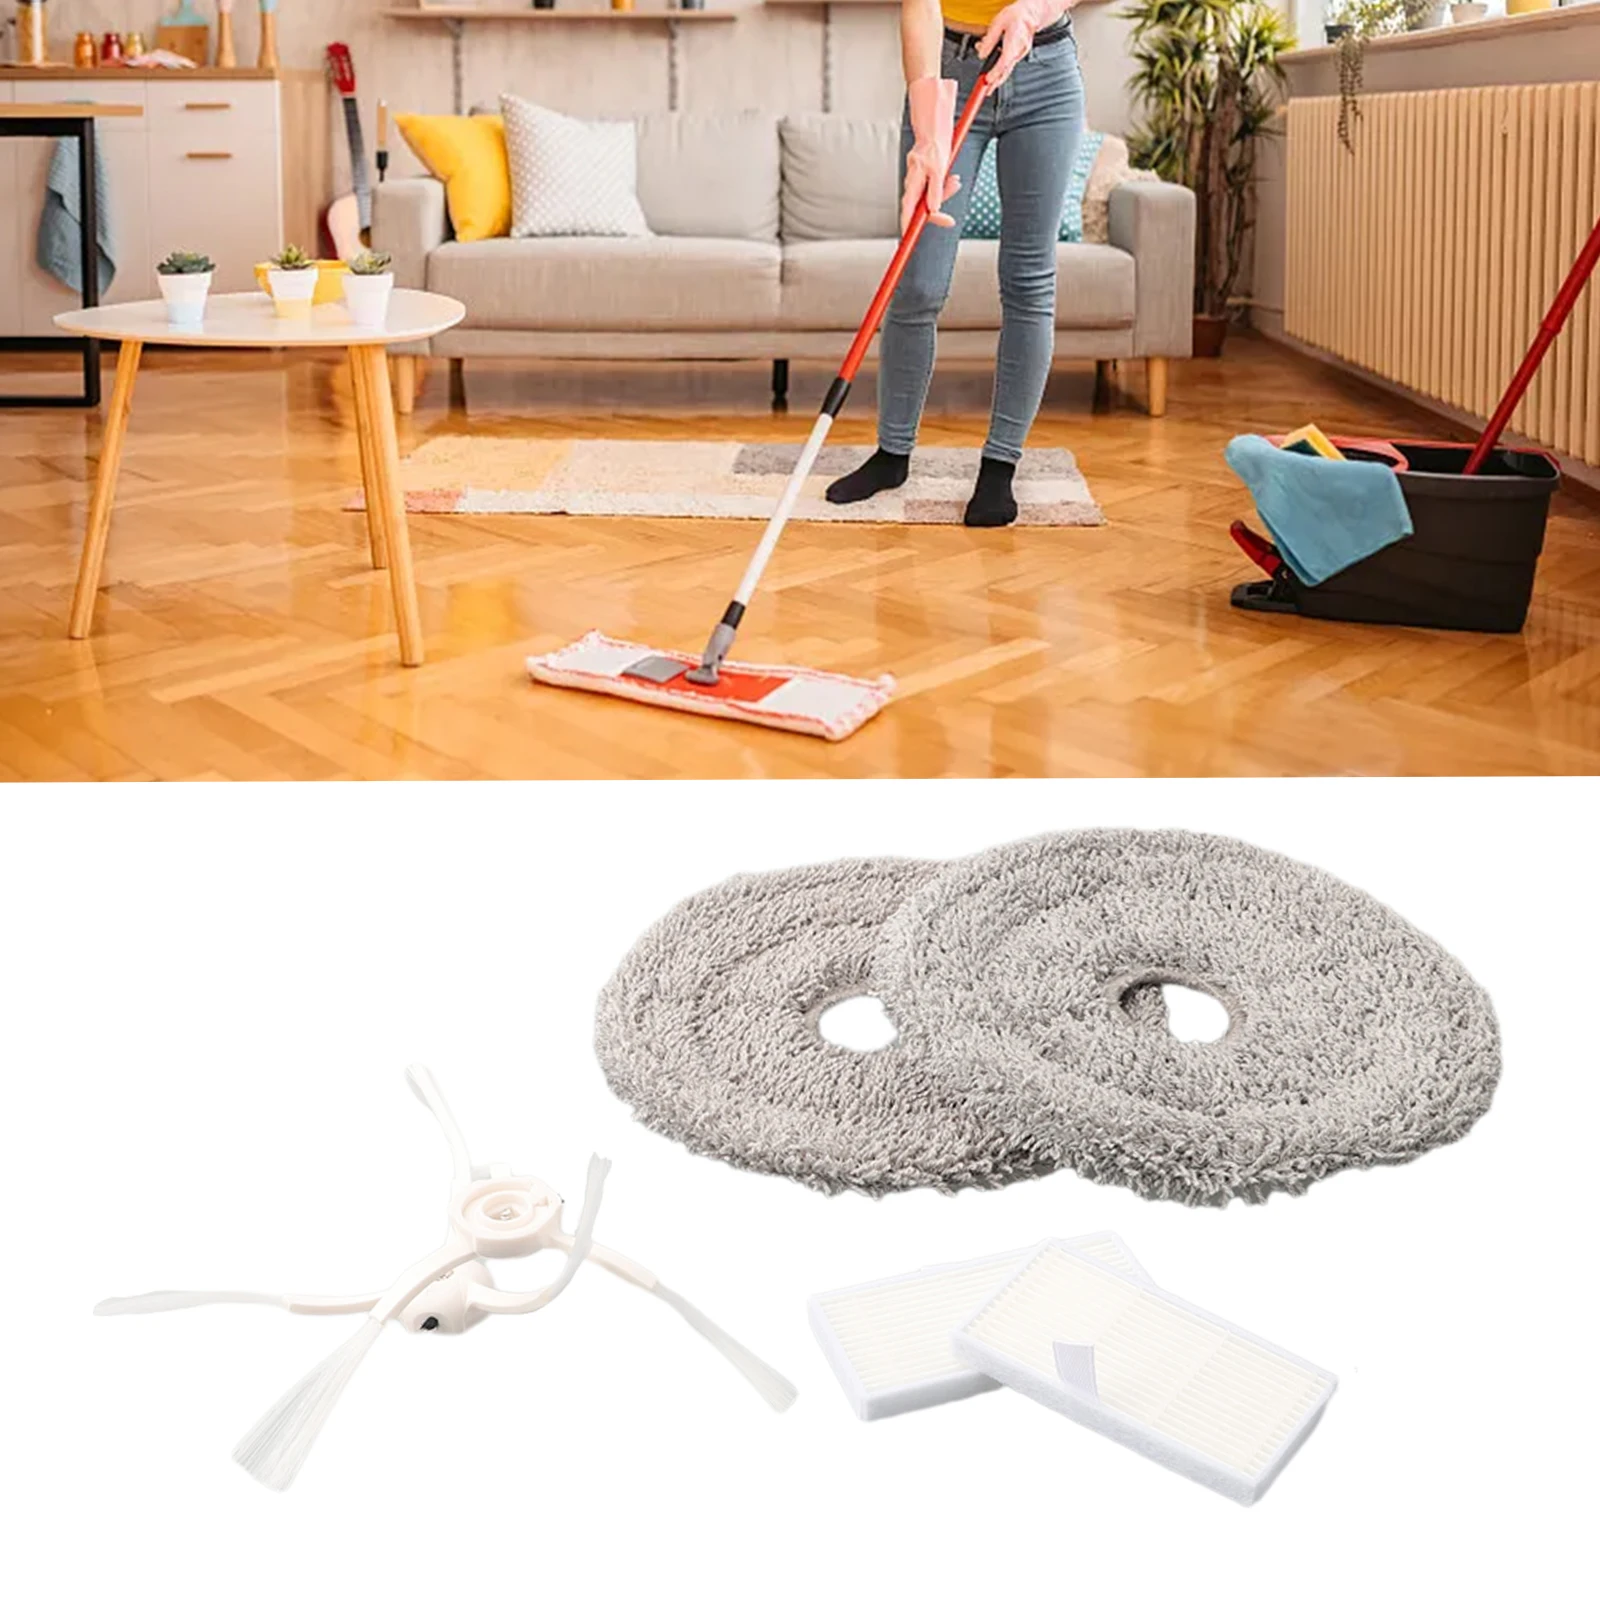 Vacuum Cleaner Accessories Set For Lydsto W2 Robot Cleaner Sweeper Replacement Side Brush Filter Mop Rag Cloth Parts for anker eufy robovac l70 spare parts mop cleaning cloth filter side brush rag qihoo 360 x90 robot vacuum cleaner accessories